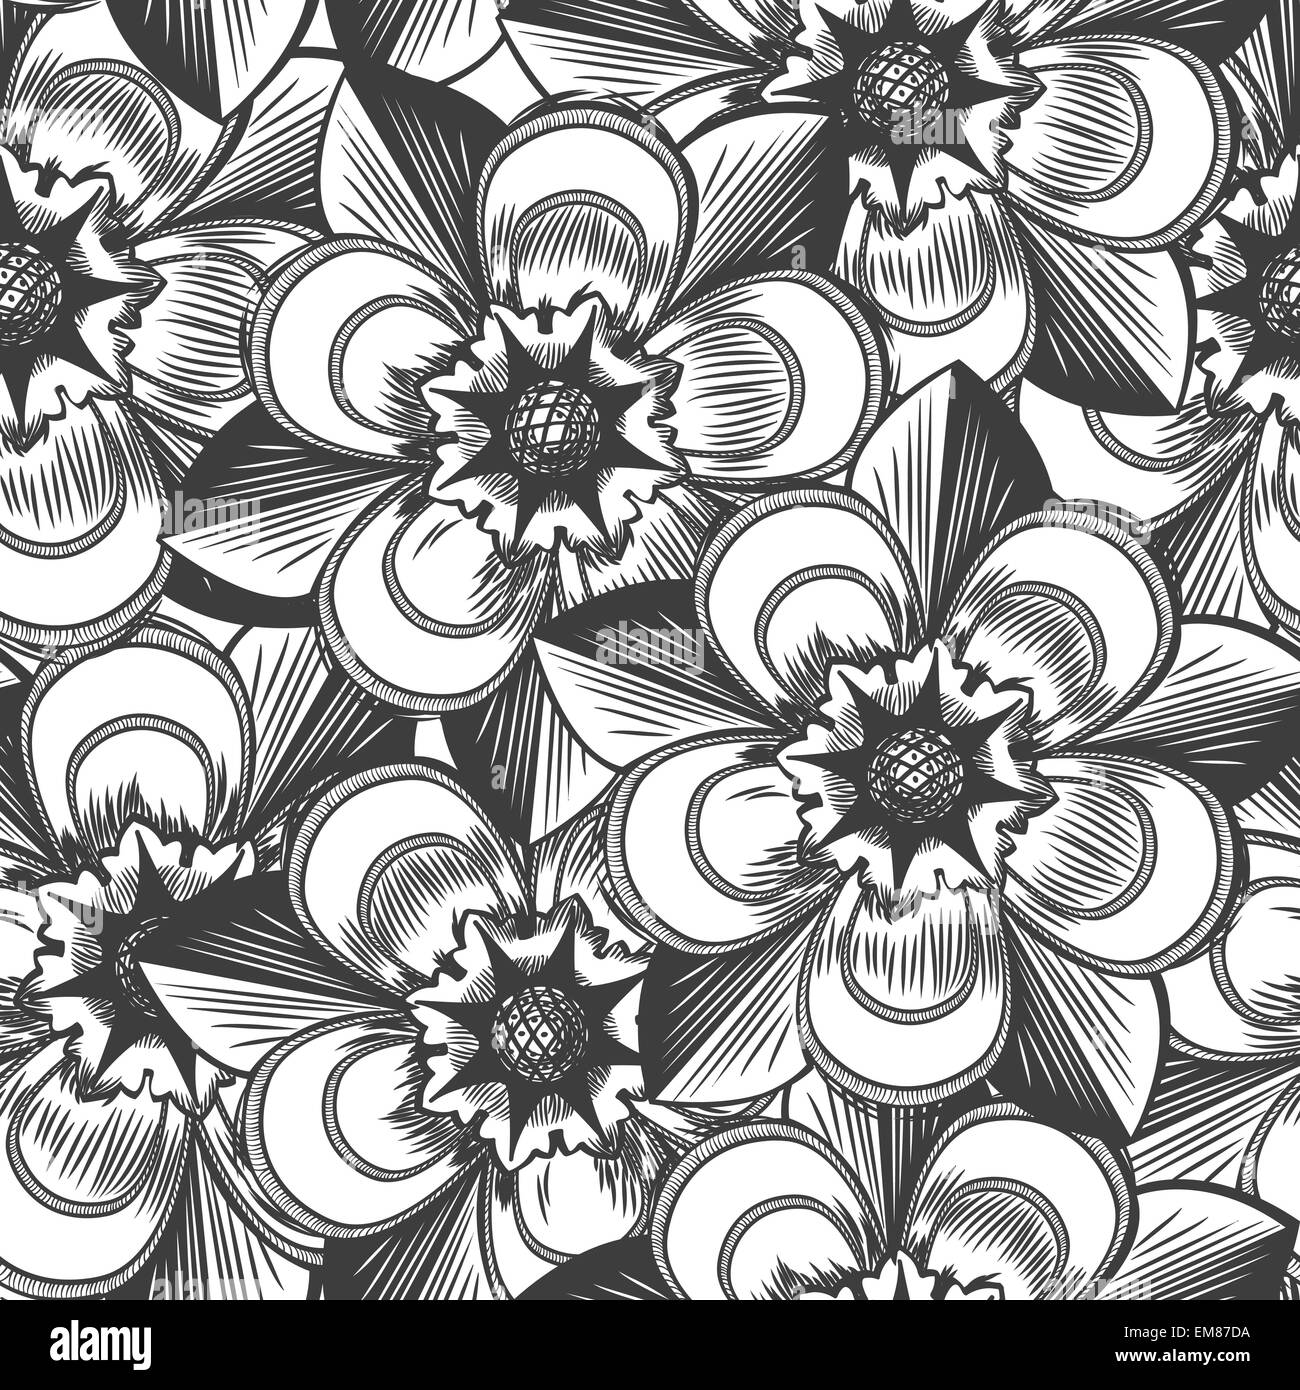 Vintage floral seamless pattern Stock Vector